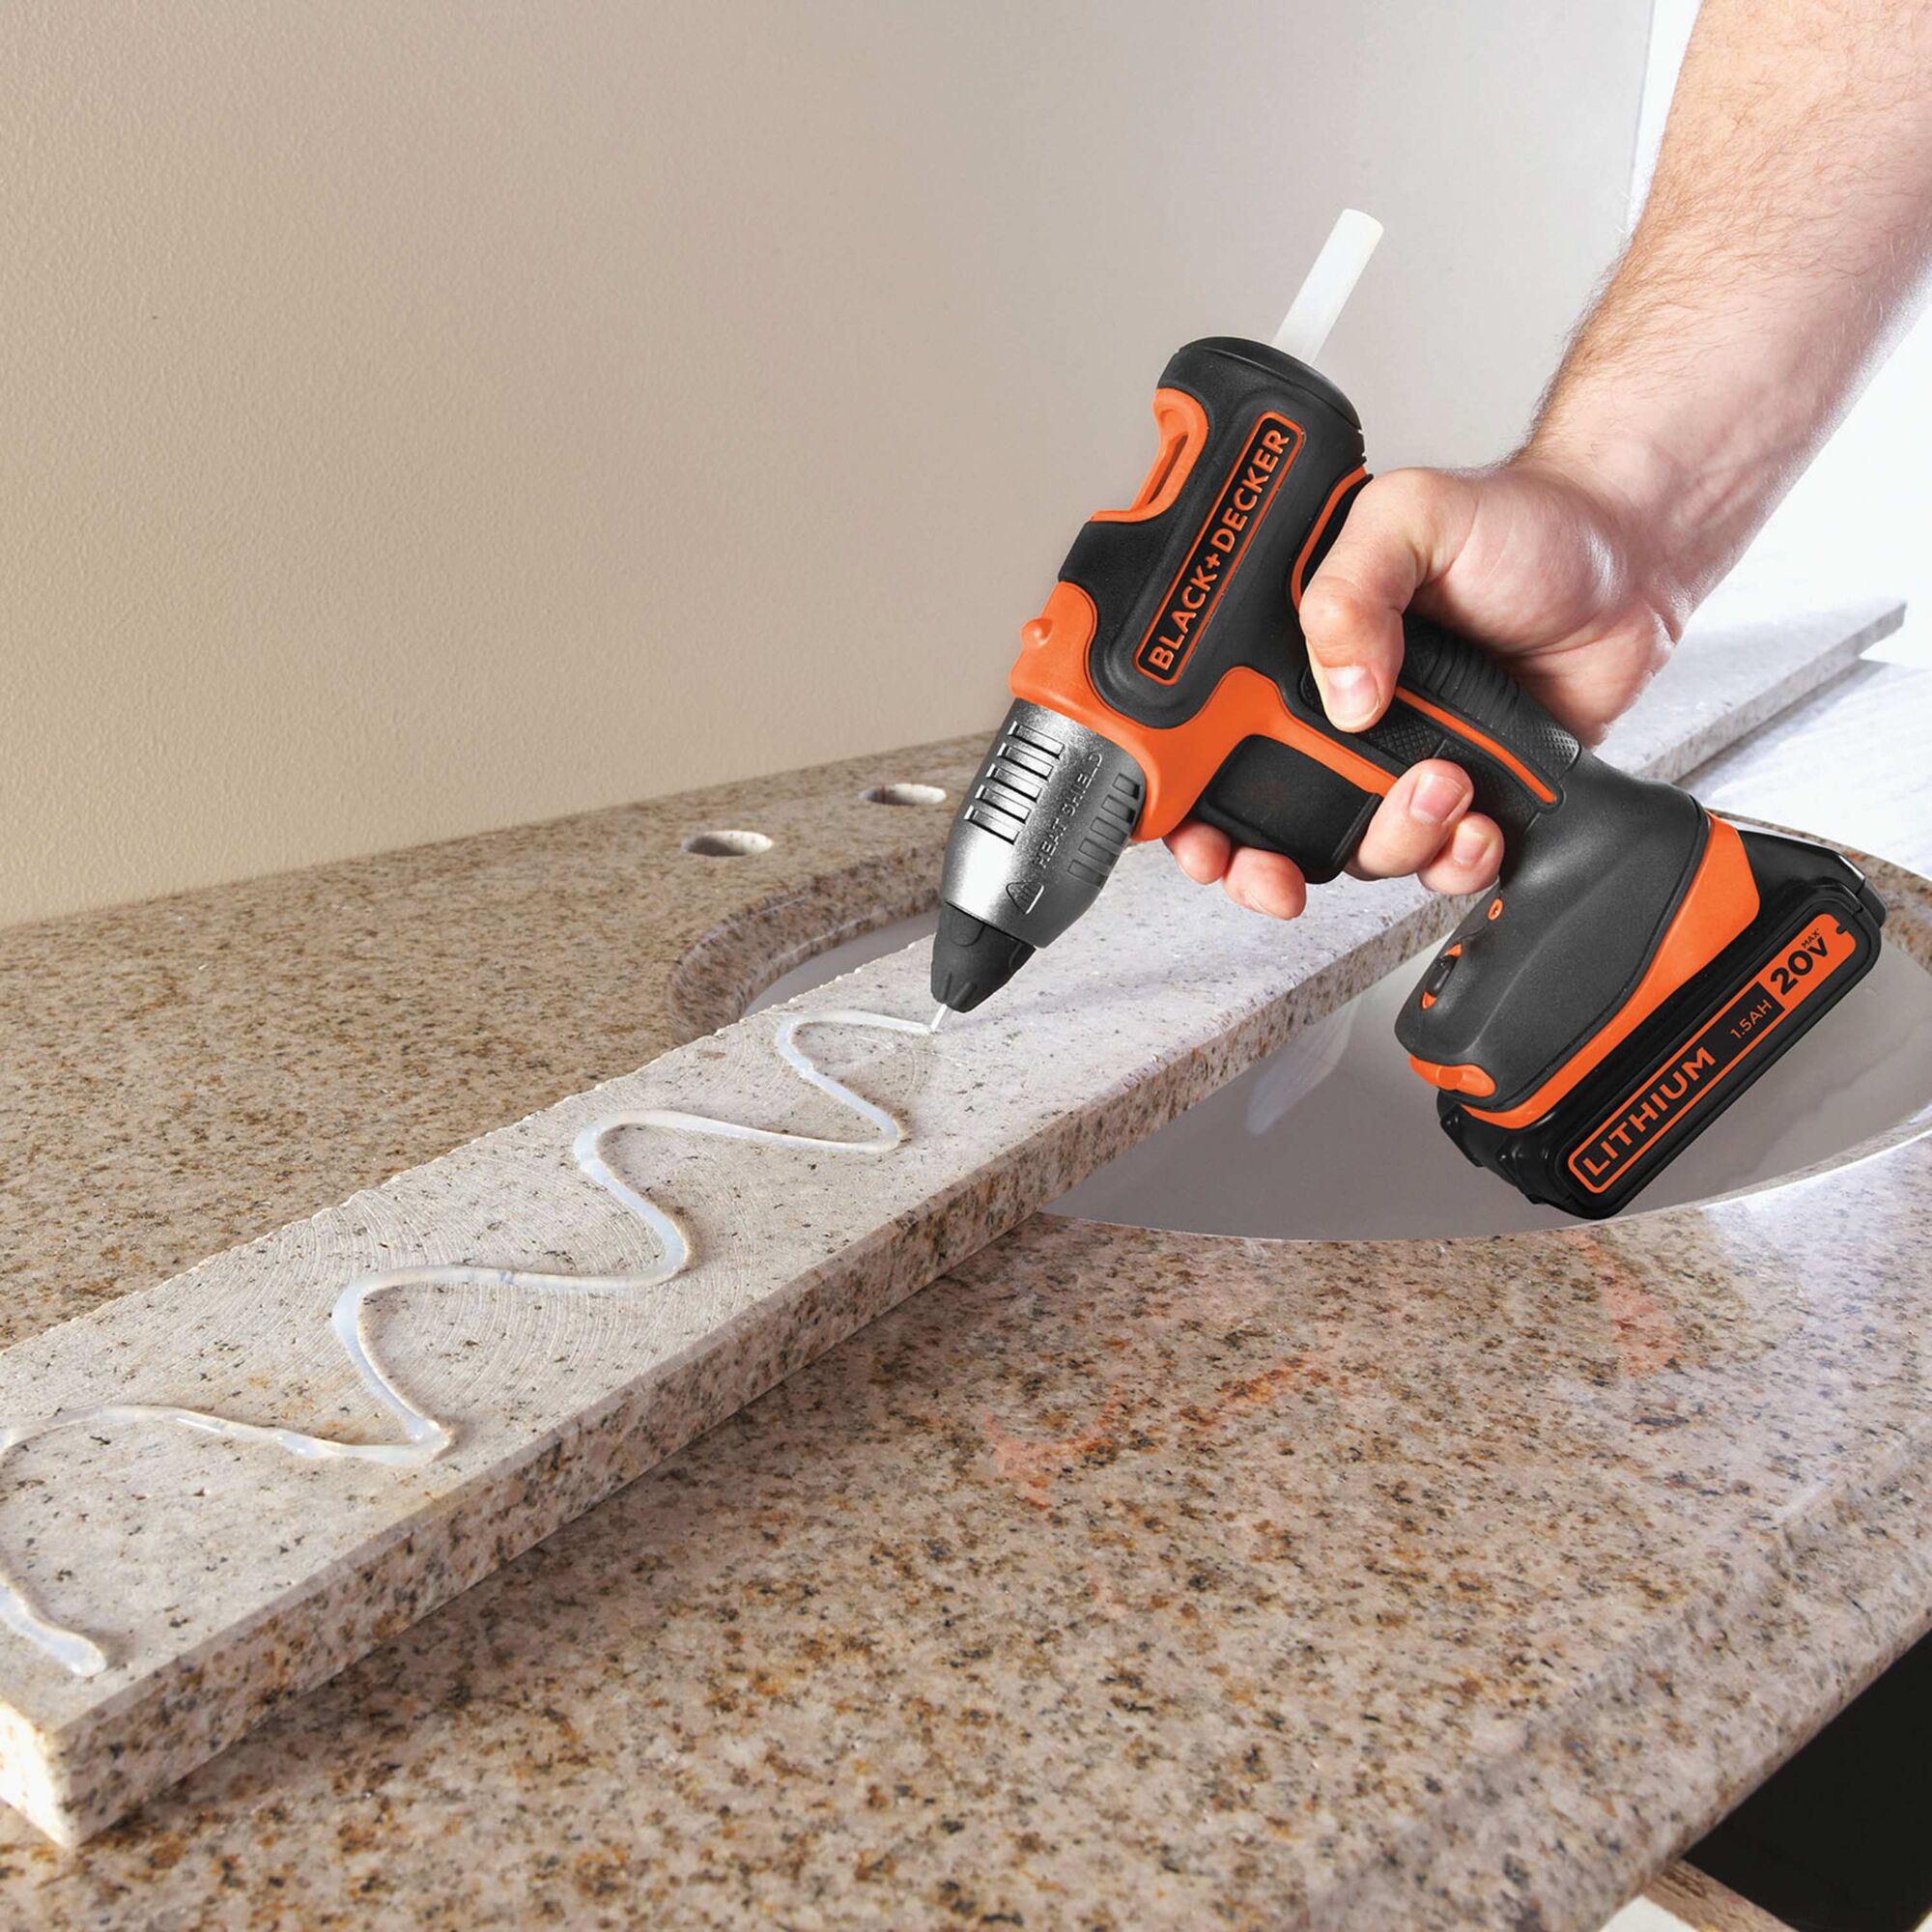 Cordless Glue Gun being used to lay long lines of glue on strip of wood.